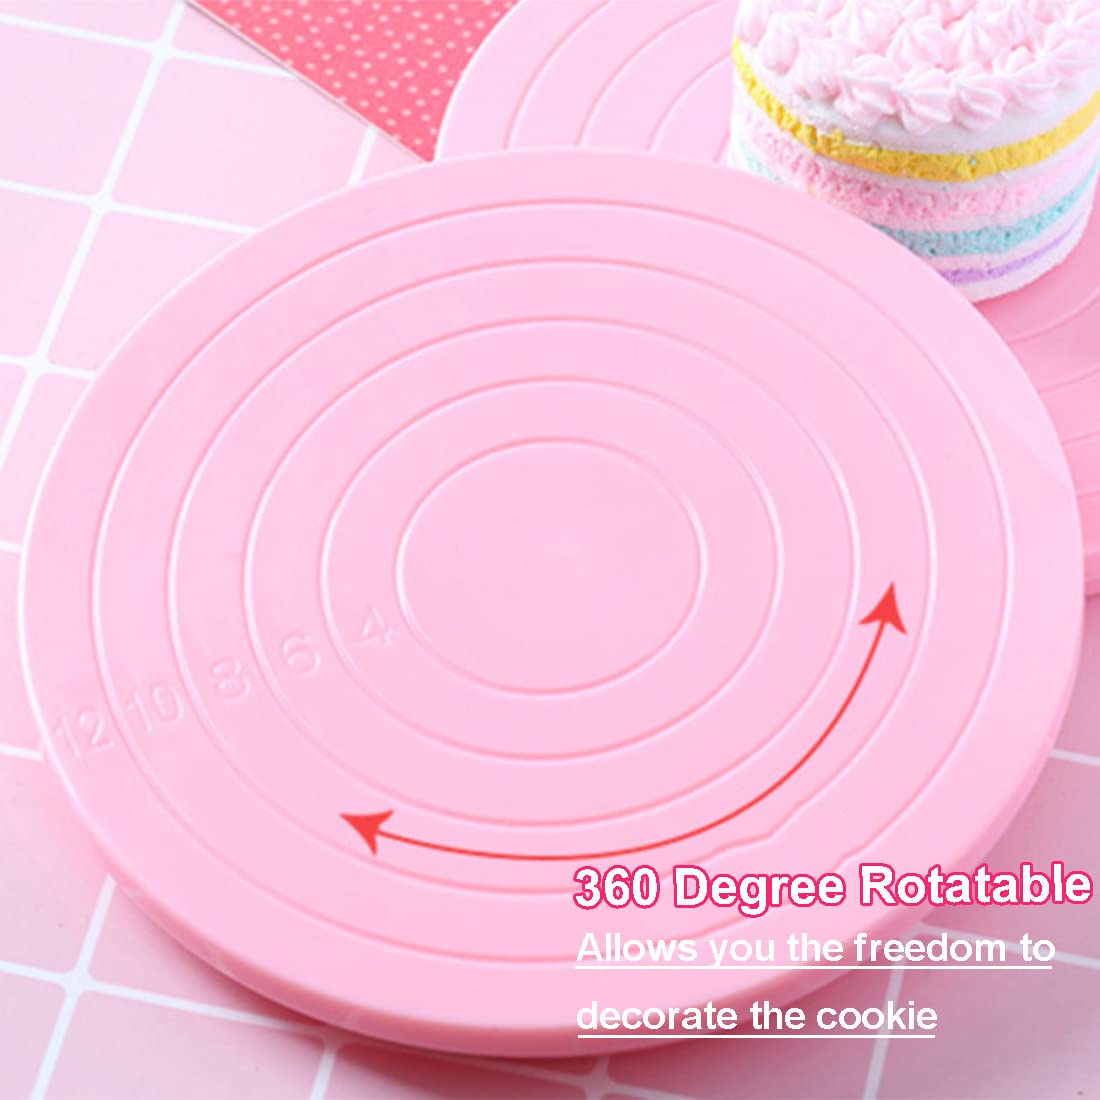 ALLRI 16 Pcs Cookie Decorating Kit Cookie Turntable Decorating Supplies with 2 Acrylic Cookie Turntable 6 Cookie Scribe Needle and 2 S